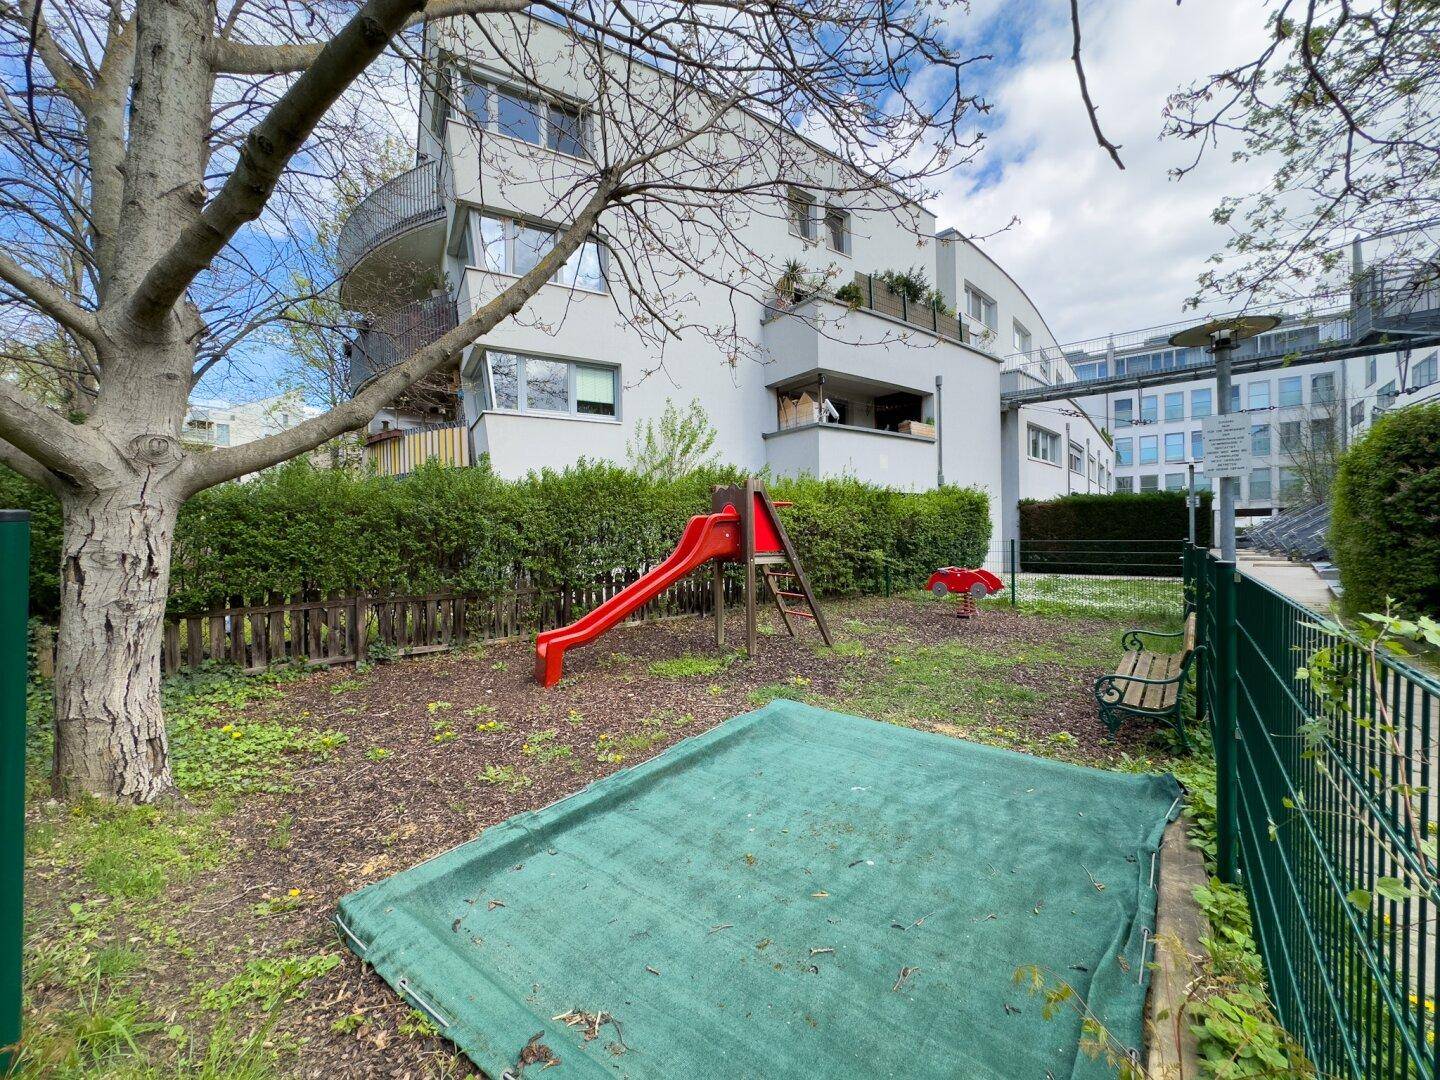 https://pictures.immobilienscout24.de/prod.www.immobilienscout24.at/pictureserver/loadPicture?q=70&id=012.0015I00000huo1k-1712581641-f3fc3aab36ae4abba8709d4b482bab93